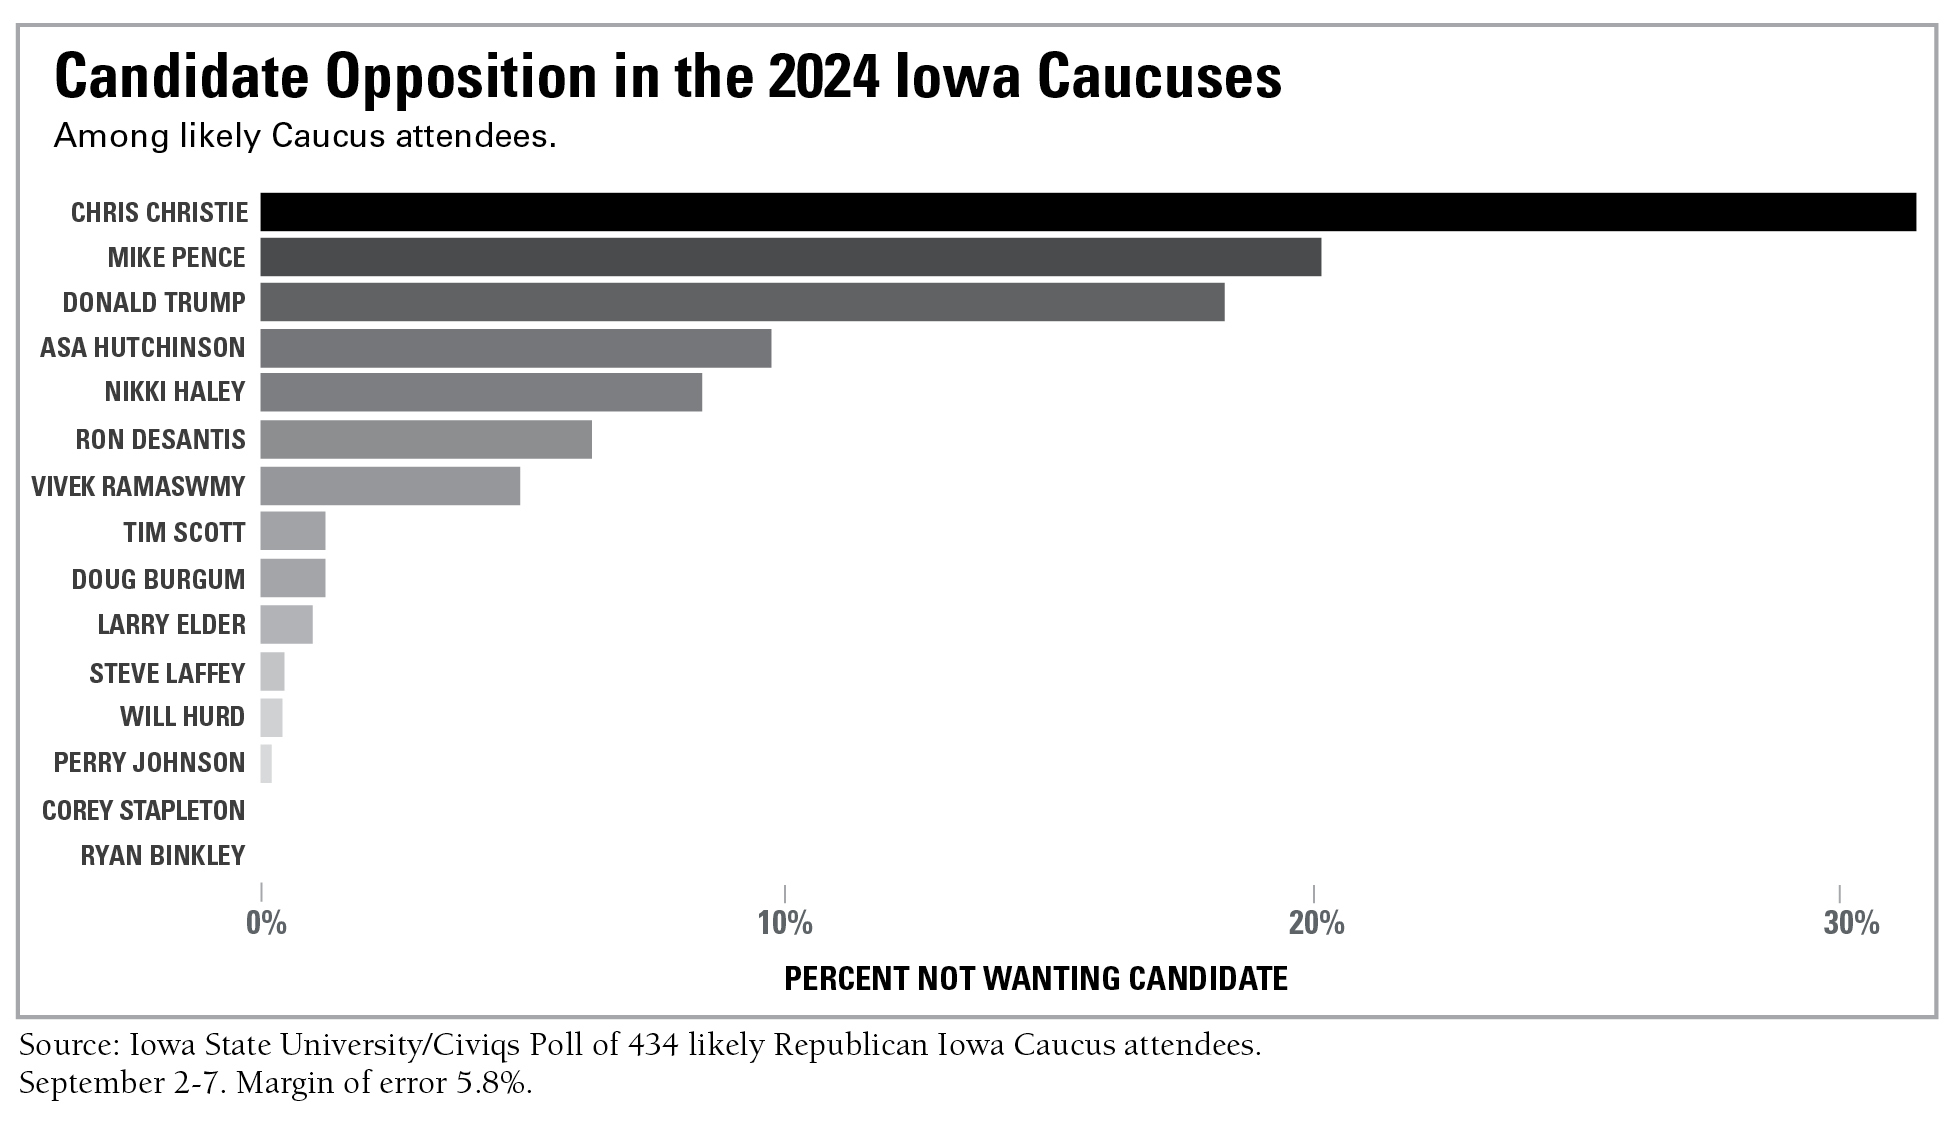 Graphic representing opposition to Republican presidential candidates among likely caucus-goers in Jan. 2024. Created by Dave Peterson, Political Science, and Deb Berger, Strategic Relations and Communications at Iowa State University.